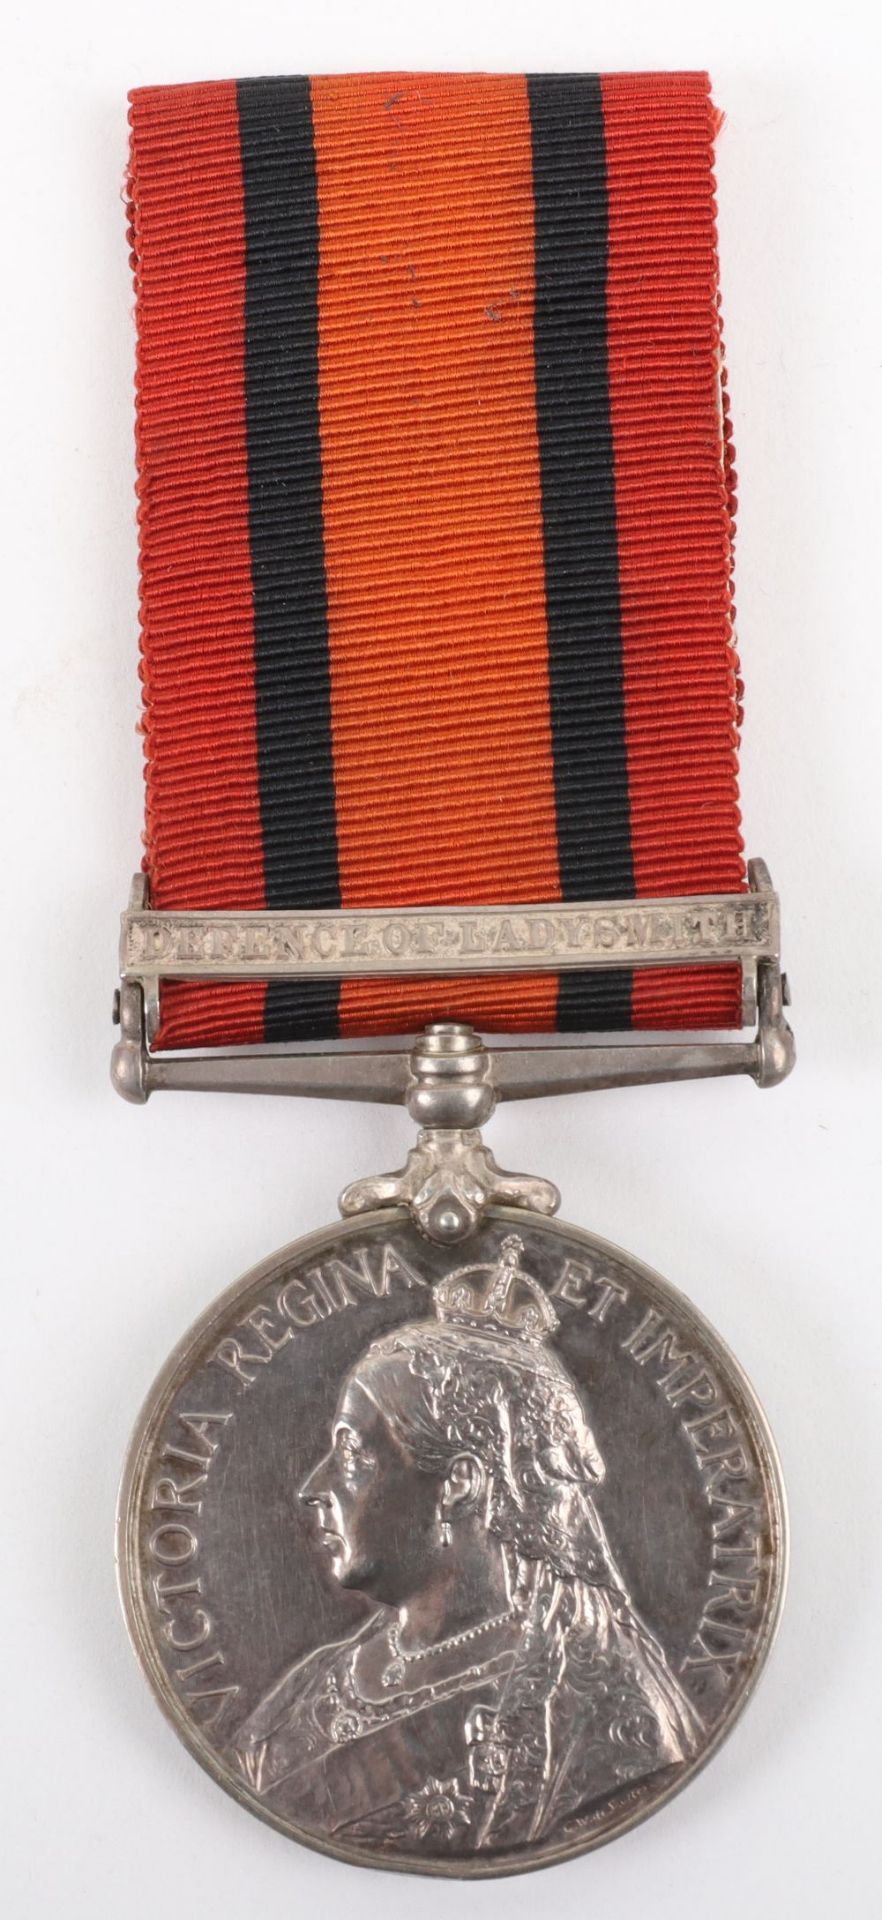 Queens South Africa Medal Awarded to the Natal Naval Volunteers for the Defence of Ladysmith